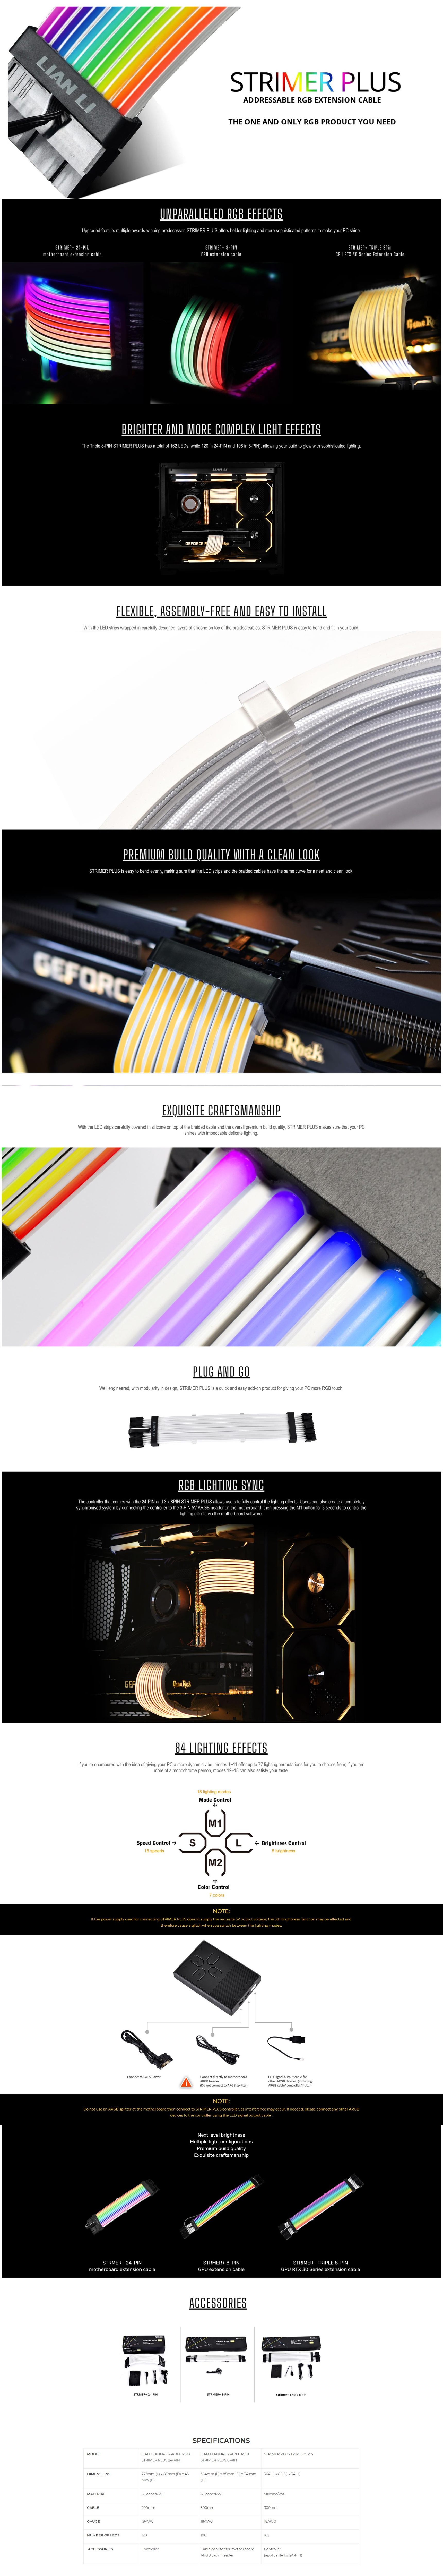 A large marketing image providing additional information about the product Lian Li Strimer Plus 8-Pin Triple PCIe ARGB LED Extension Cable - Additional alt info not provided